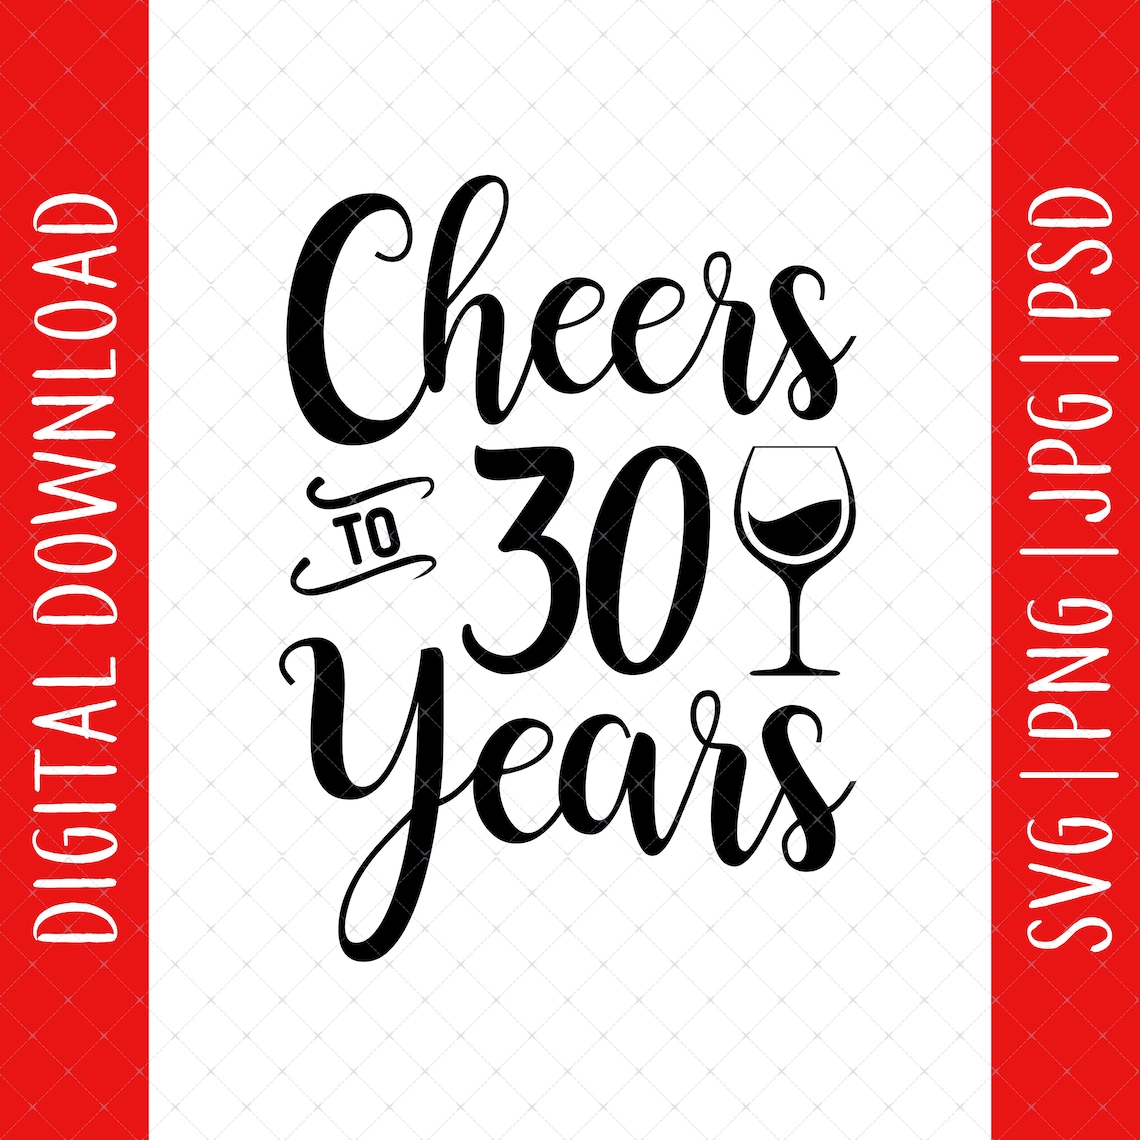 cheers-to-30-years-svg-png-jpg-psd-digital-download-30th-etsy